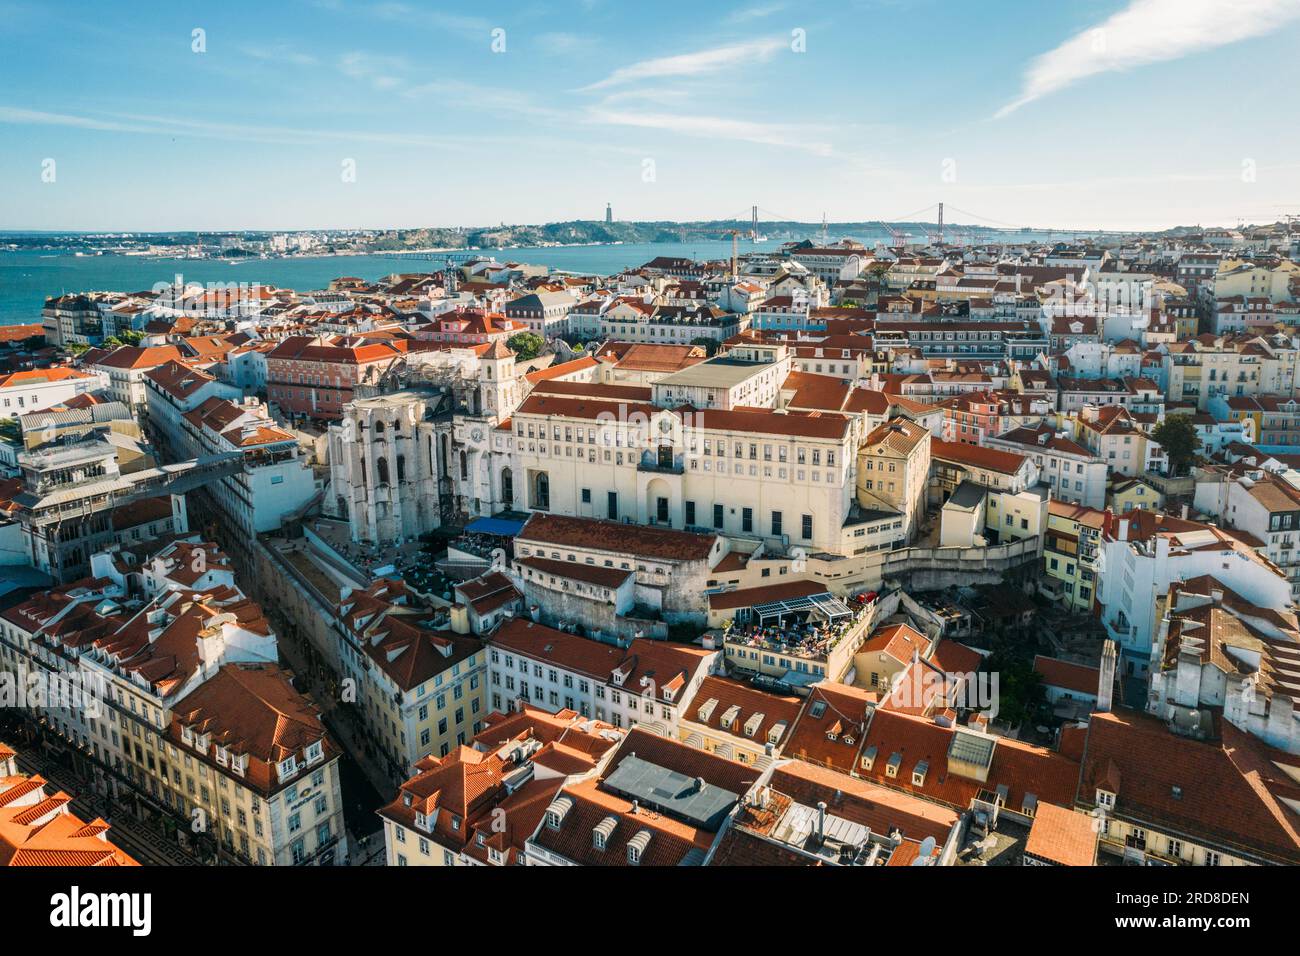 Aerial drone view of Carmo Church and surrounding historic neighbourhood in Chiado, with Tagus River and 25 April Bridge visible, Lisbon, Portugal Stock Photo